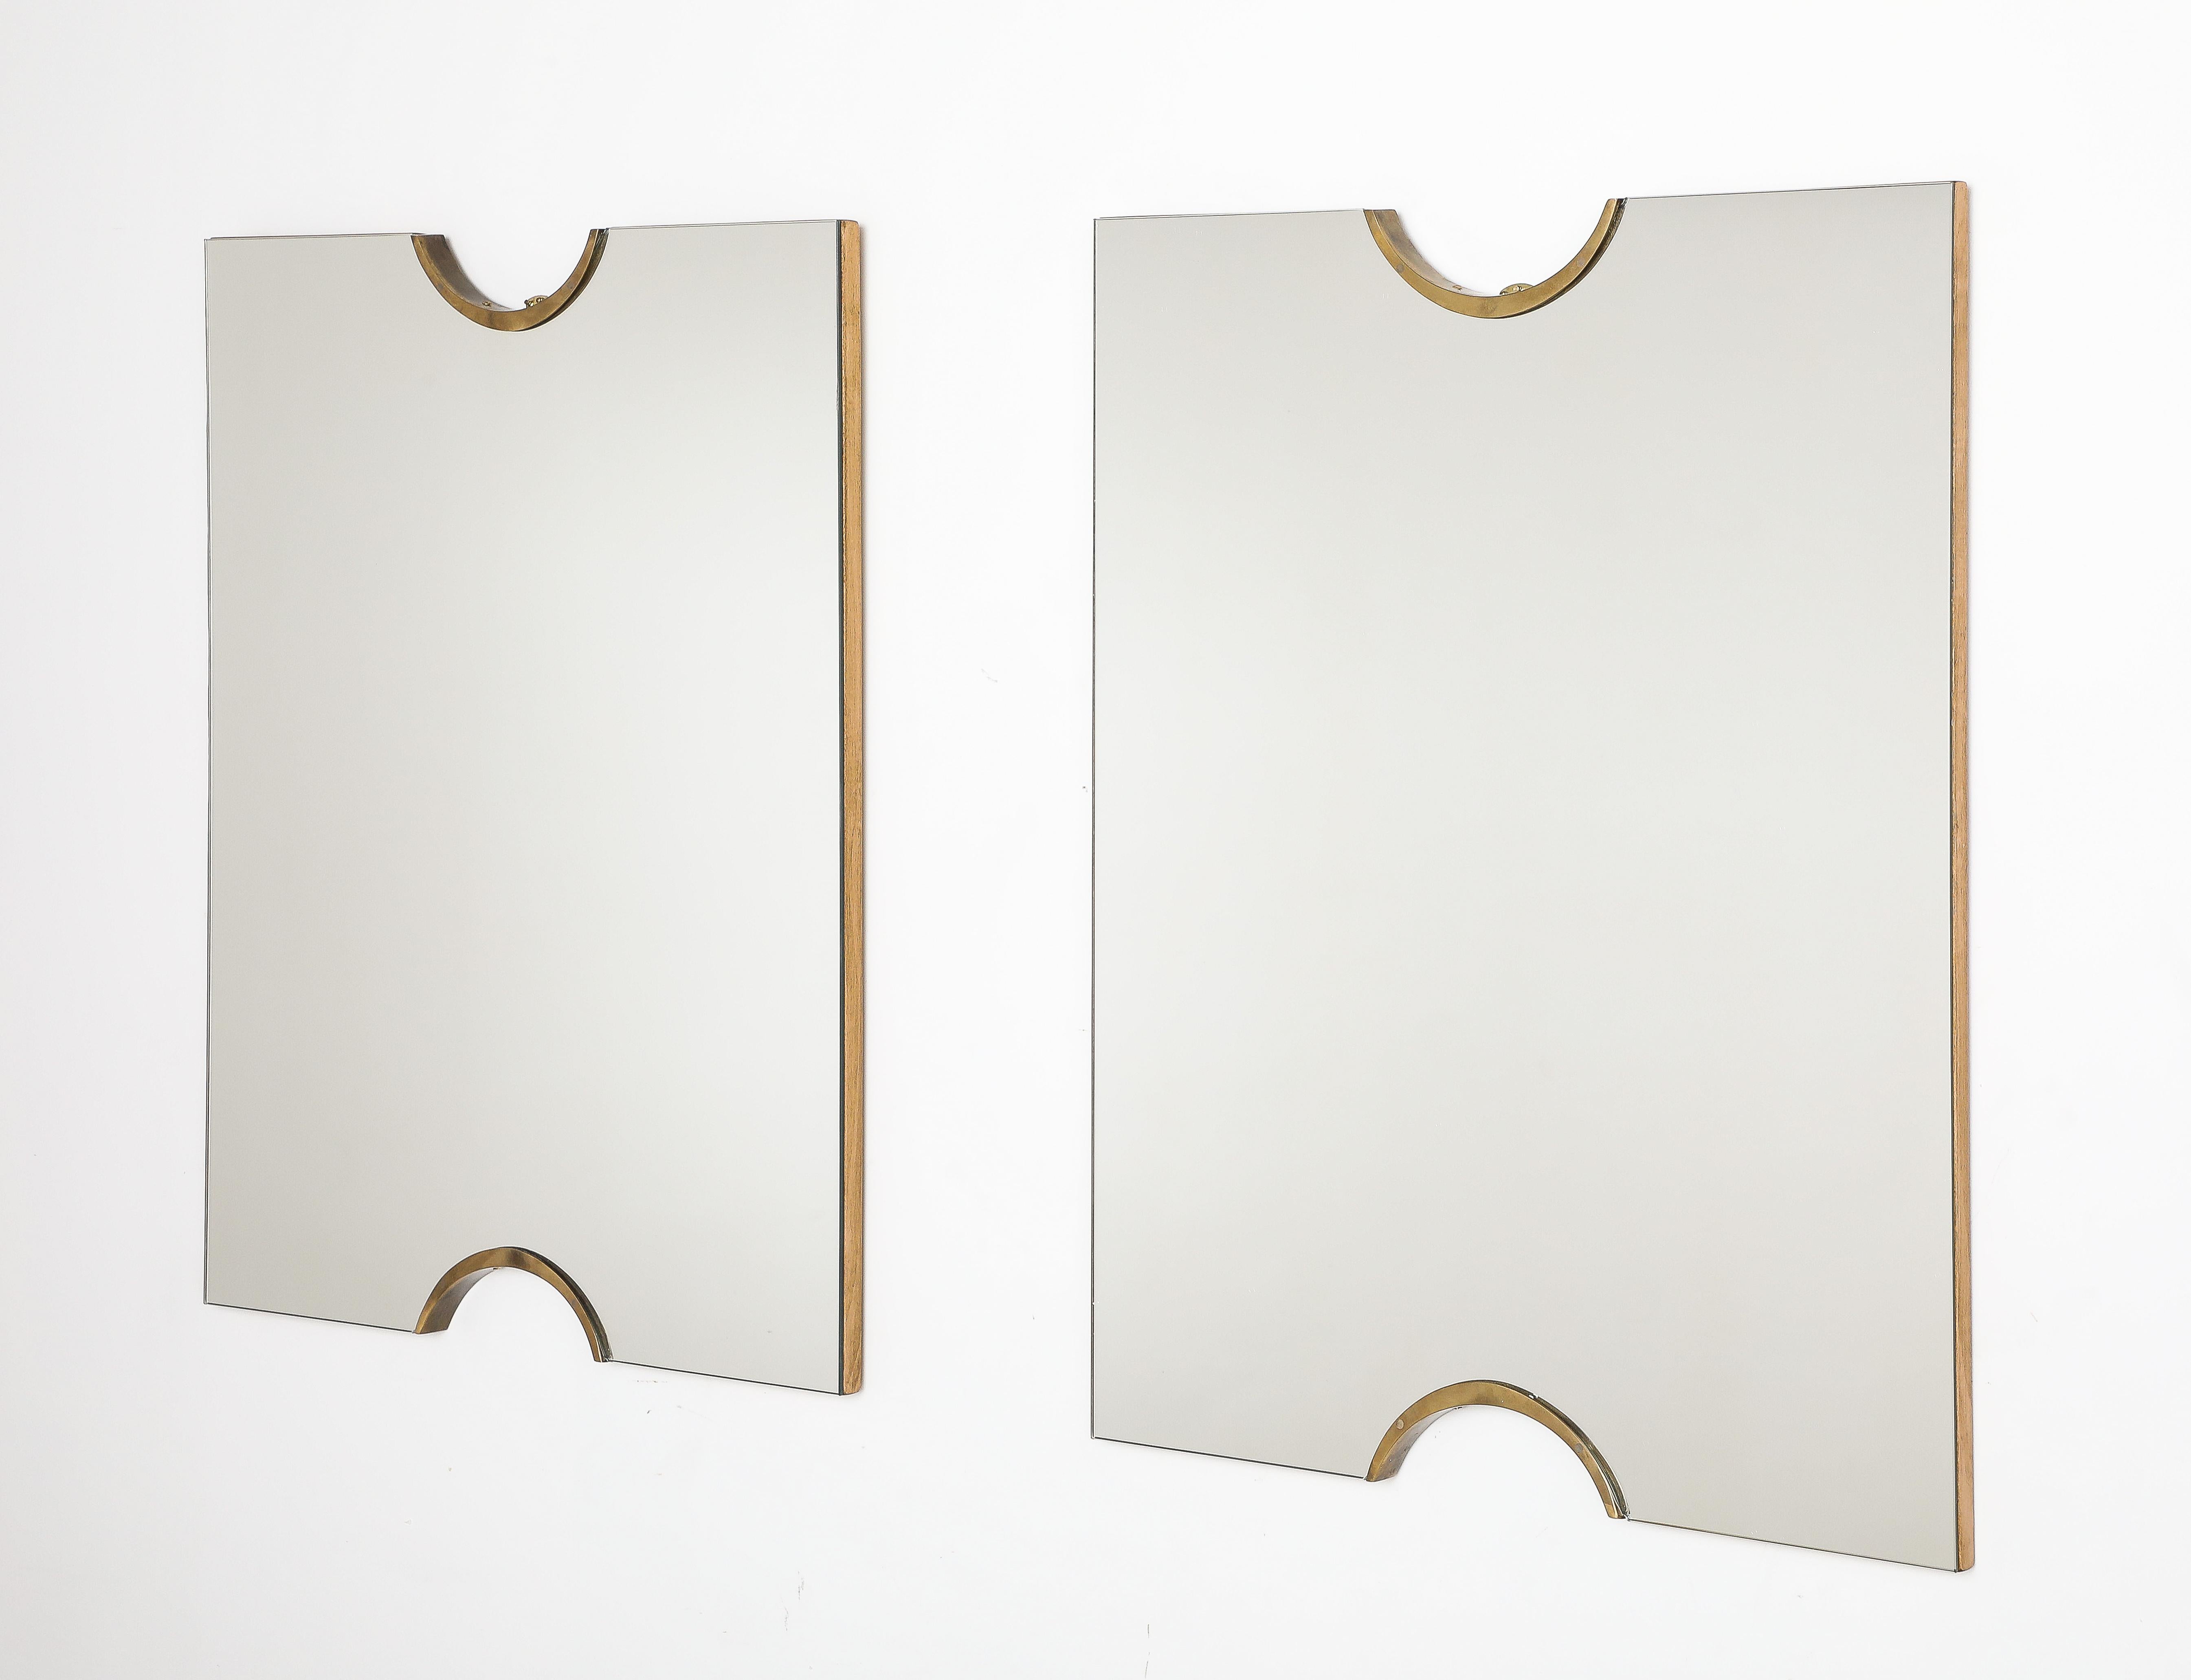 A pair of Italian modernist wall mirrors, the rectangular mirror plate with brass shaped semi-circle motif on the crest and base.  The whole with a chic and streamlined aesthetic with no border or molding interruptions.  Mounted on a wood frame.